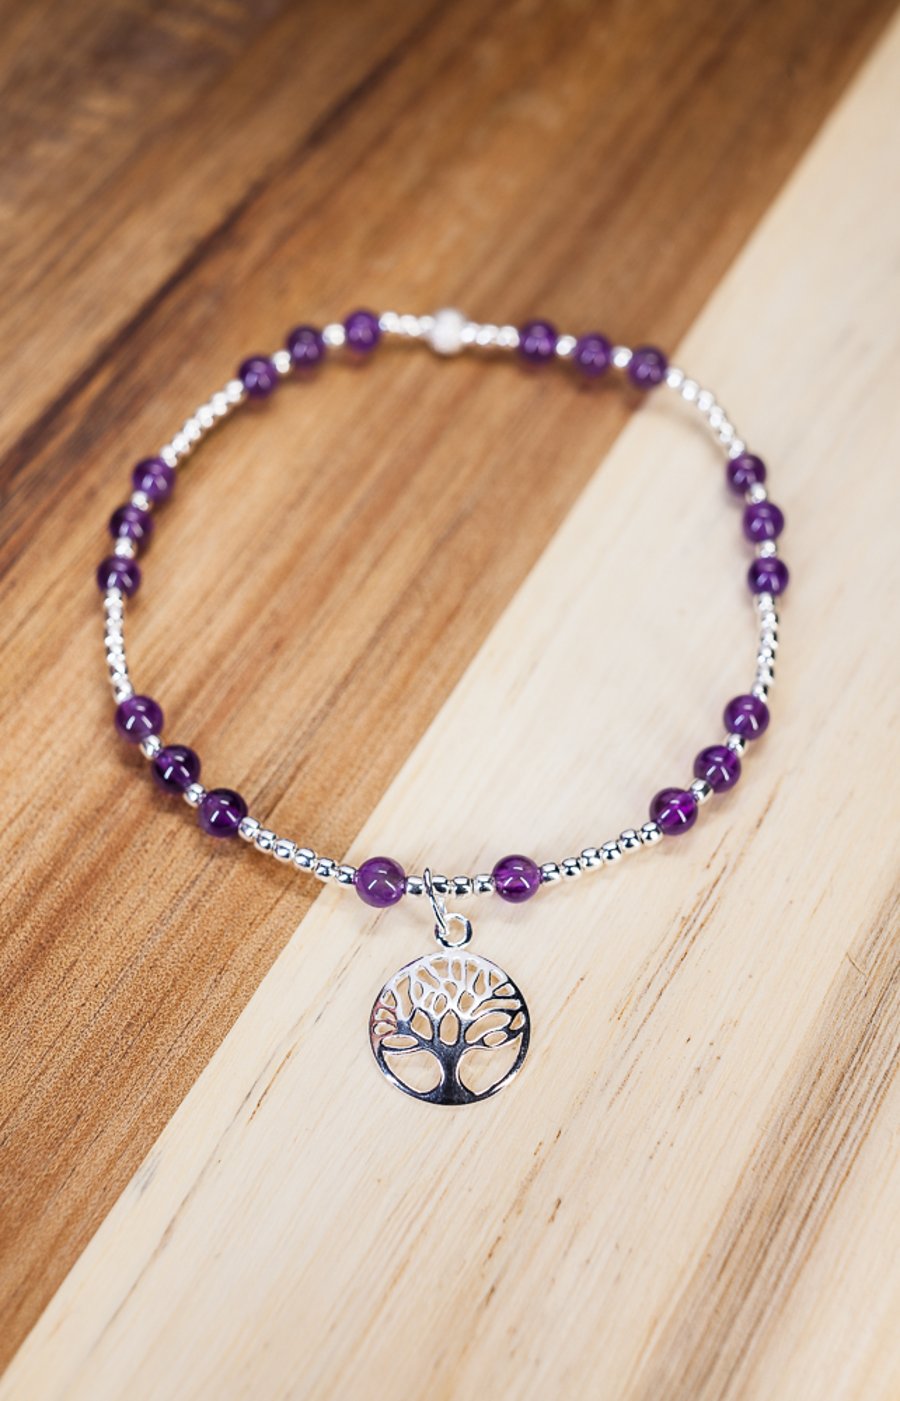 Amethyst and Sterling Silver Tree of Life stretch beaded Bracelet